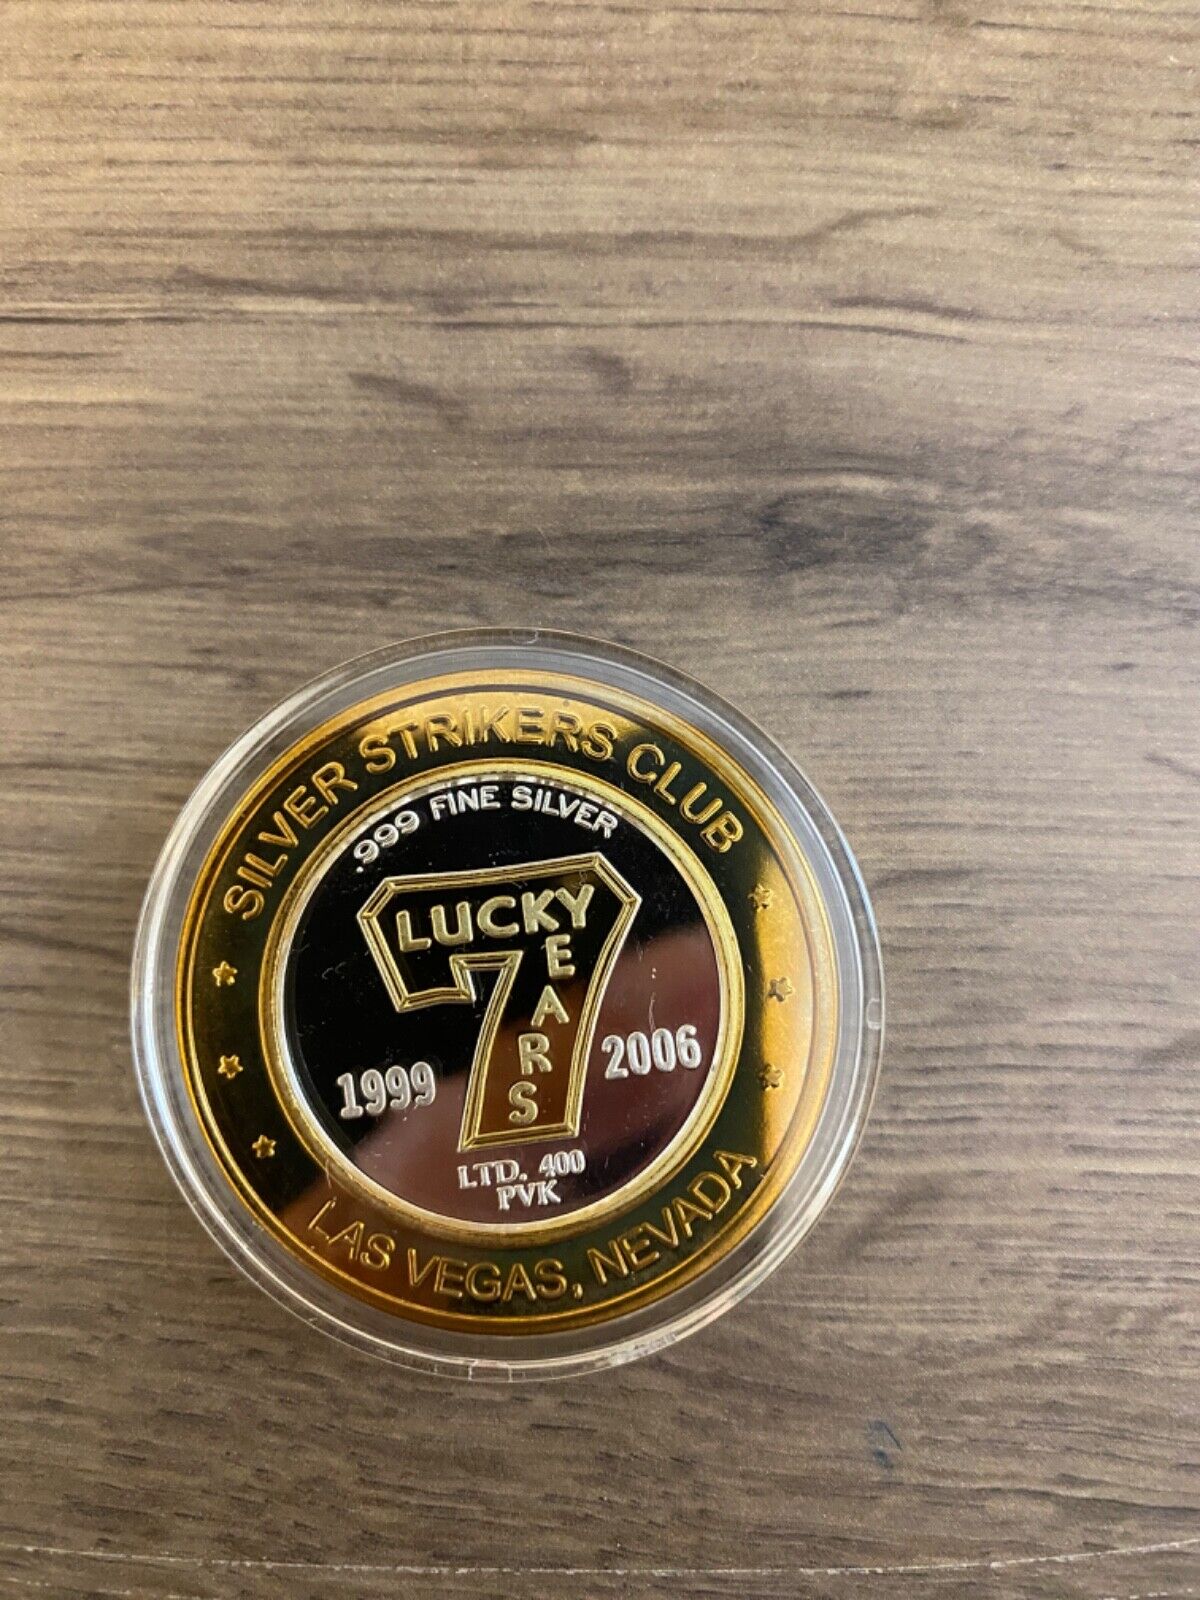 Silver Strikers Club Coin - 1999/2006 - 7 Lucky Years